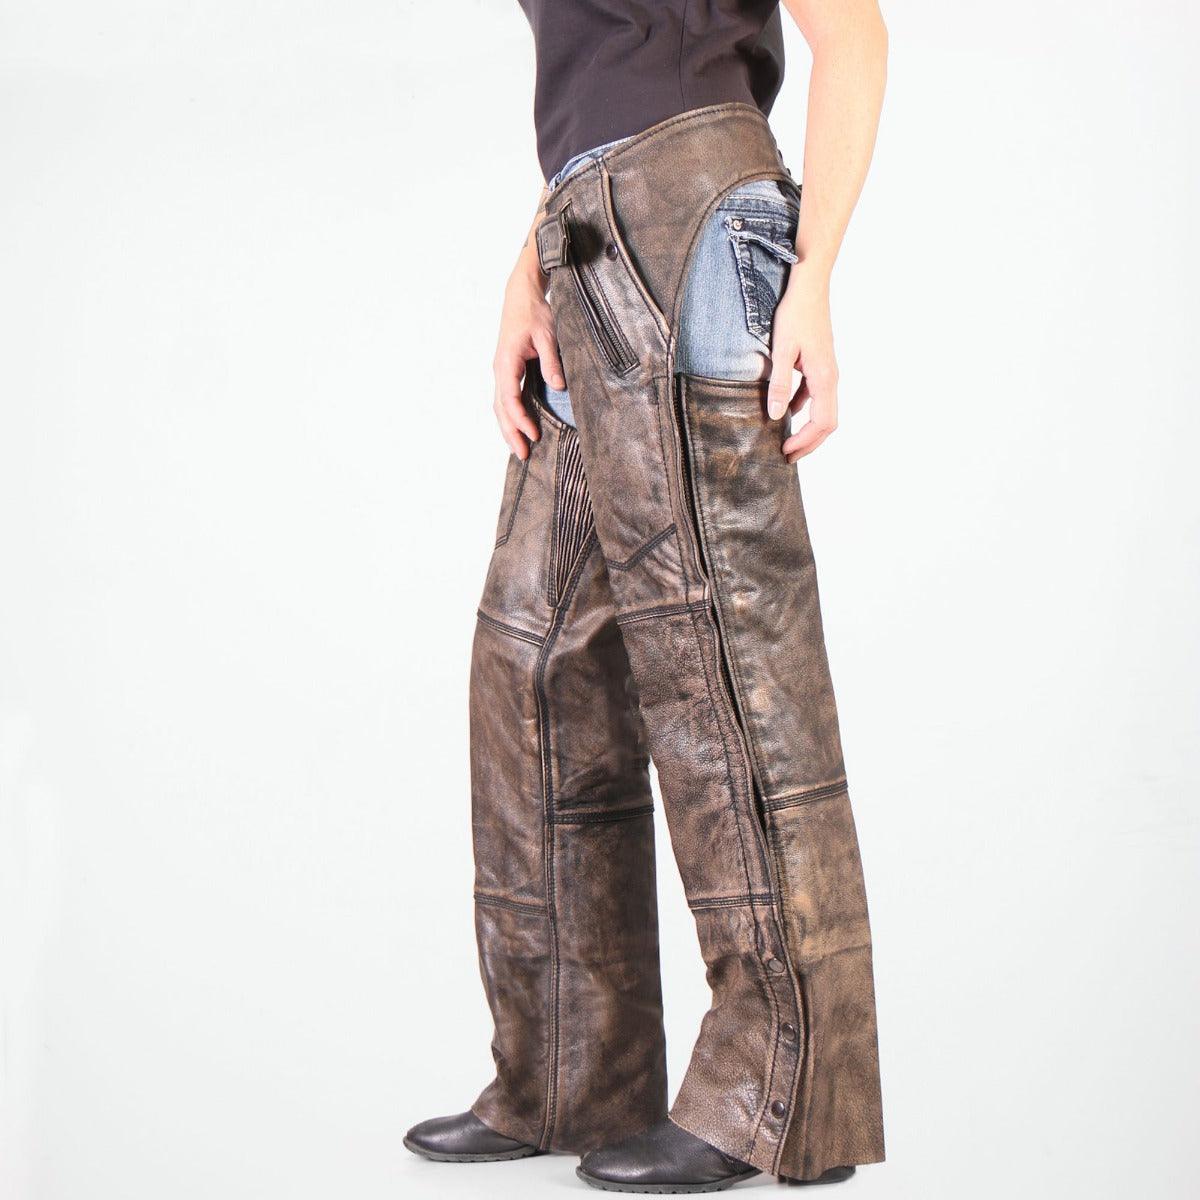 Hot Leathers Unisex Distressed Brown Leather Chaps - American Legend Rider